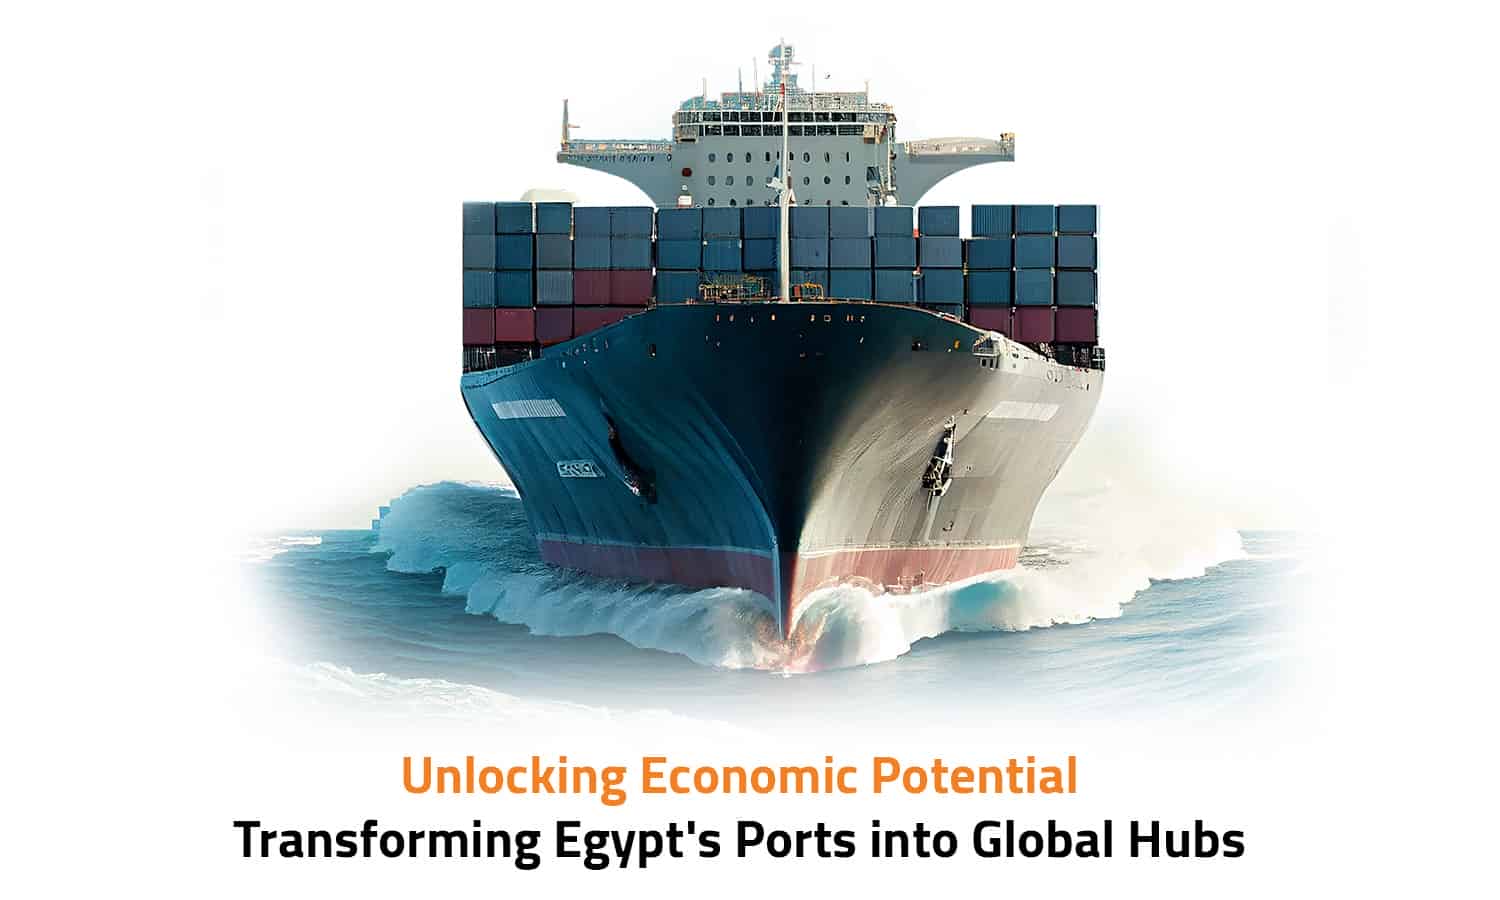 Unlocking Economic Potential: Transforming Egypt's Ports into Global Hubs